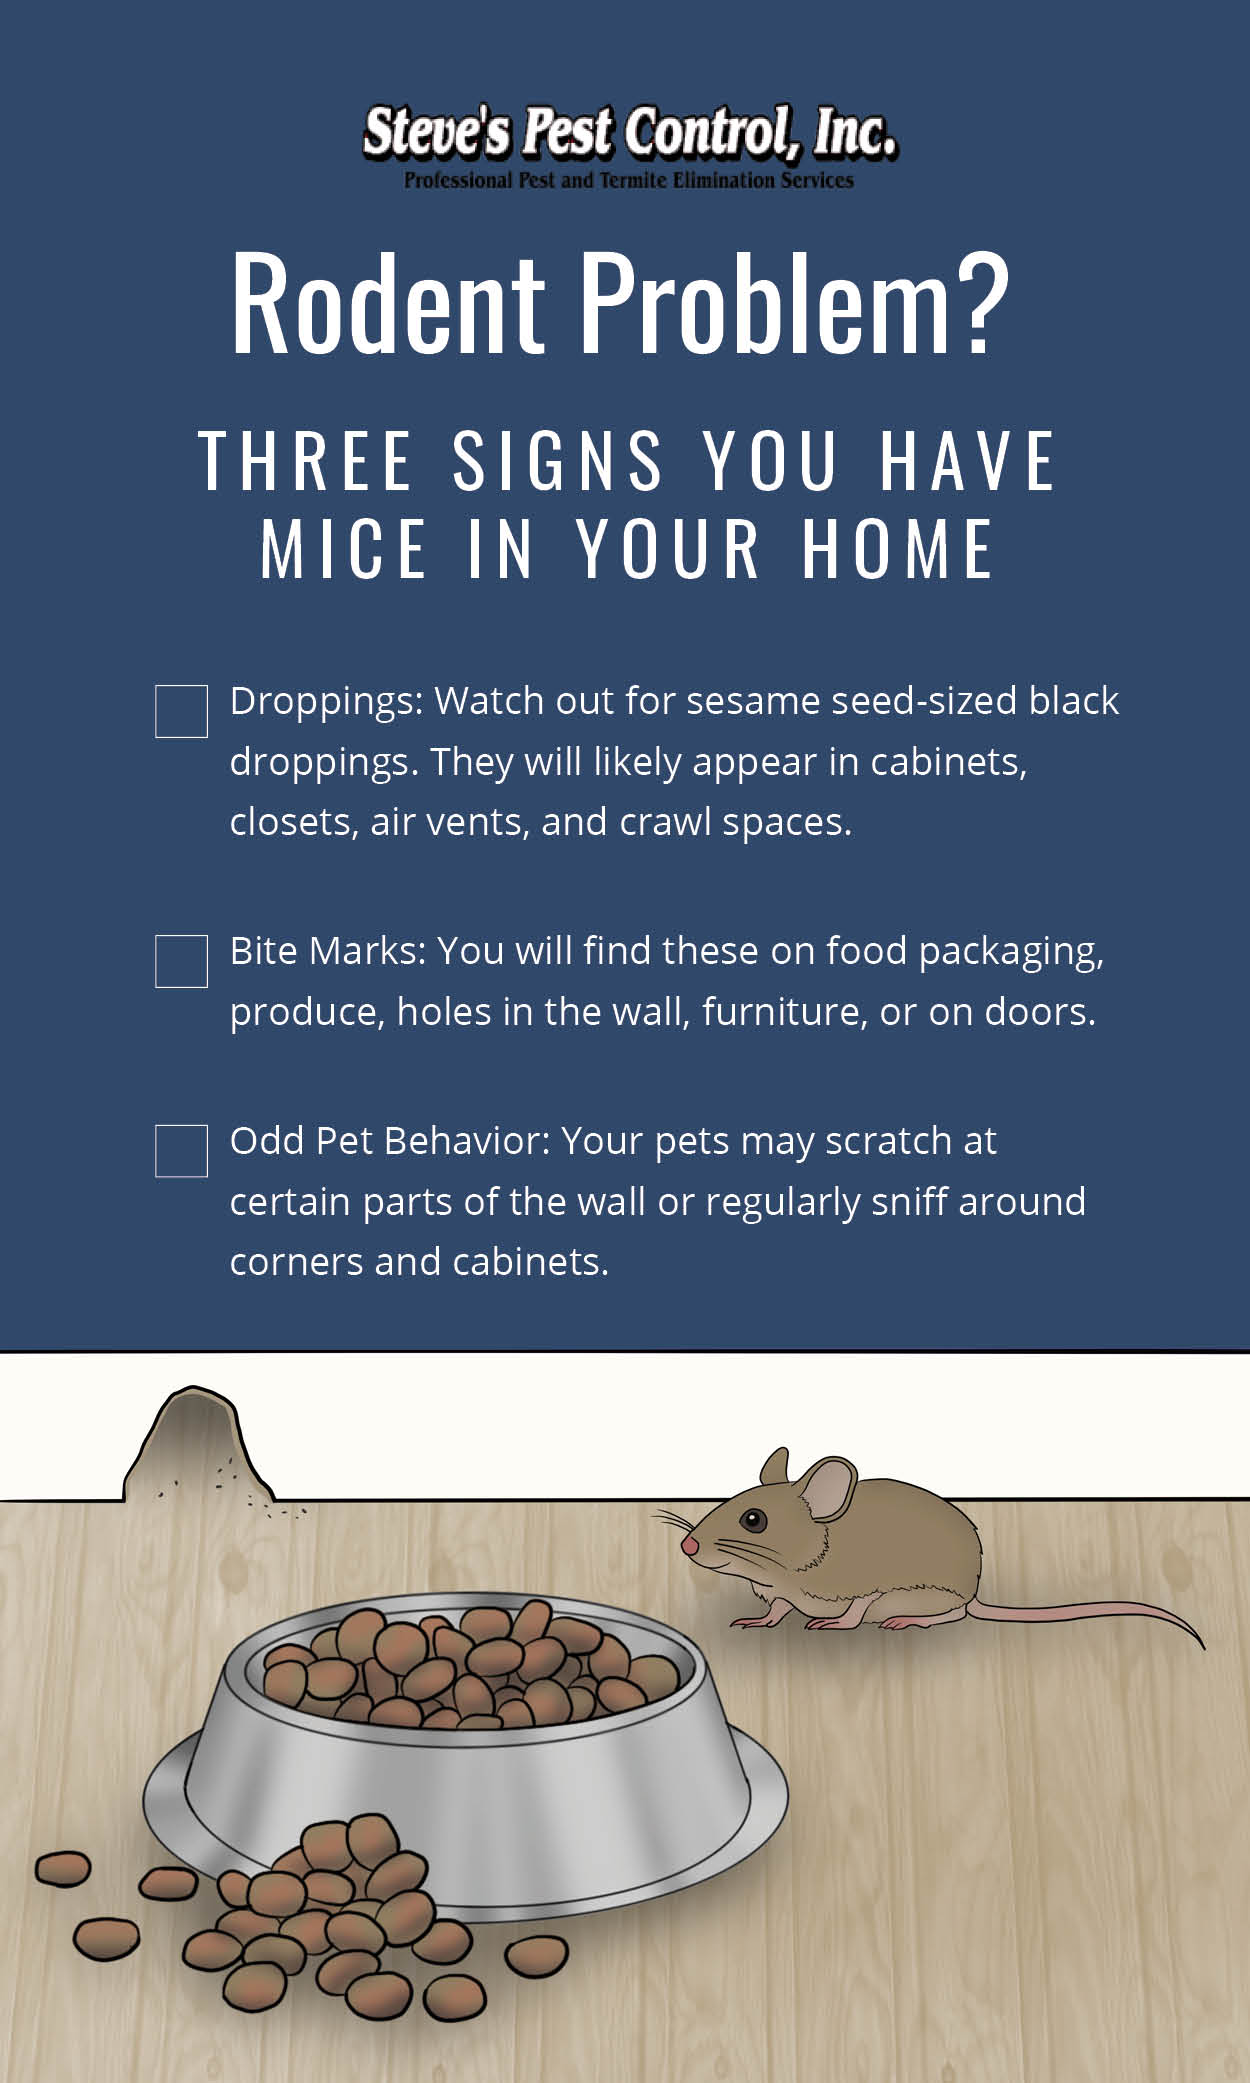 You might have mice in your home if you see droppings, bite marks, or odd behavior from your pets.